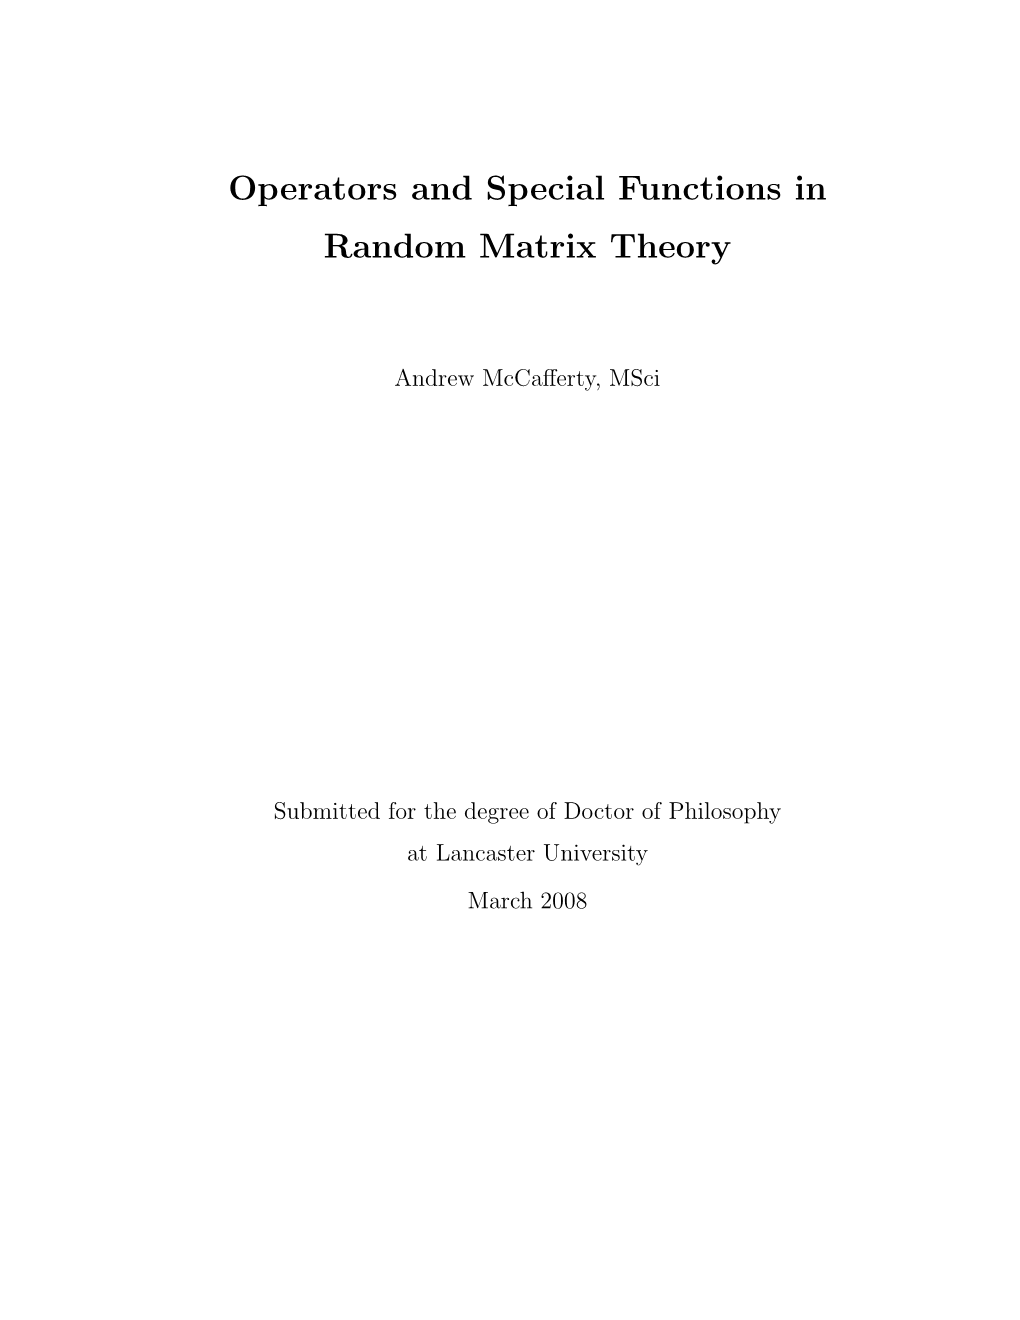 Operators and Special Functions in Random Matrix Theory